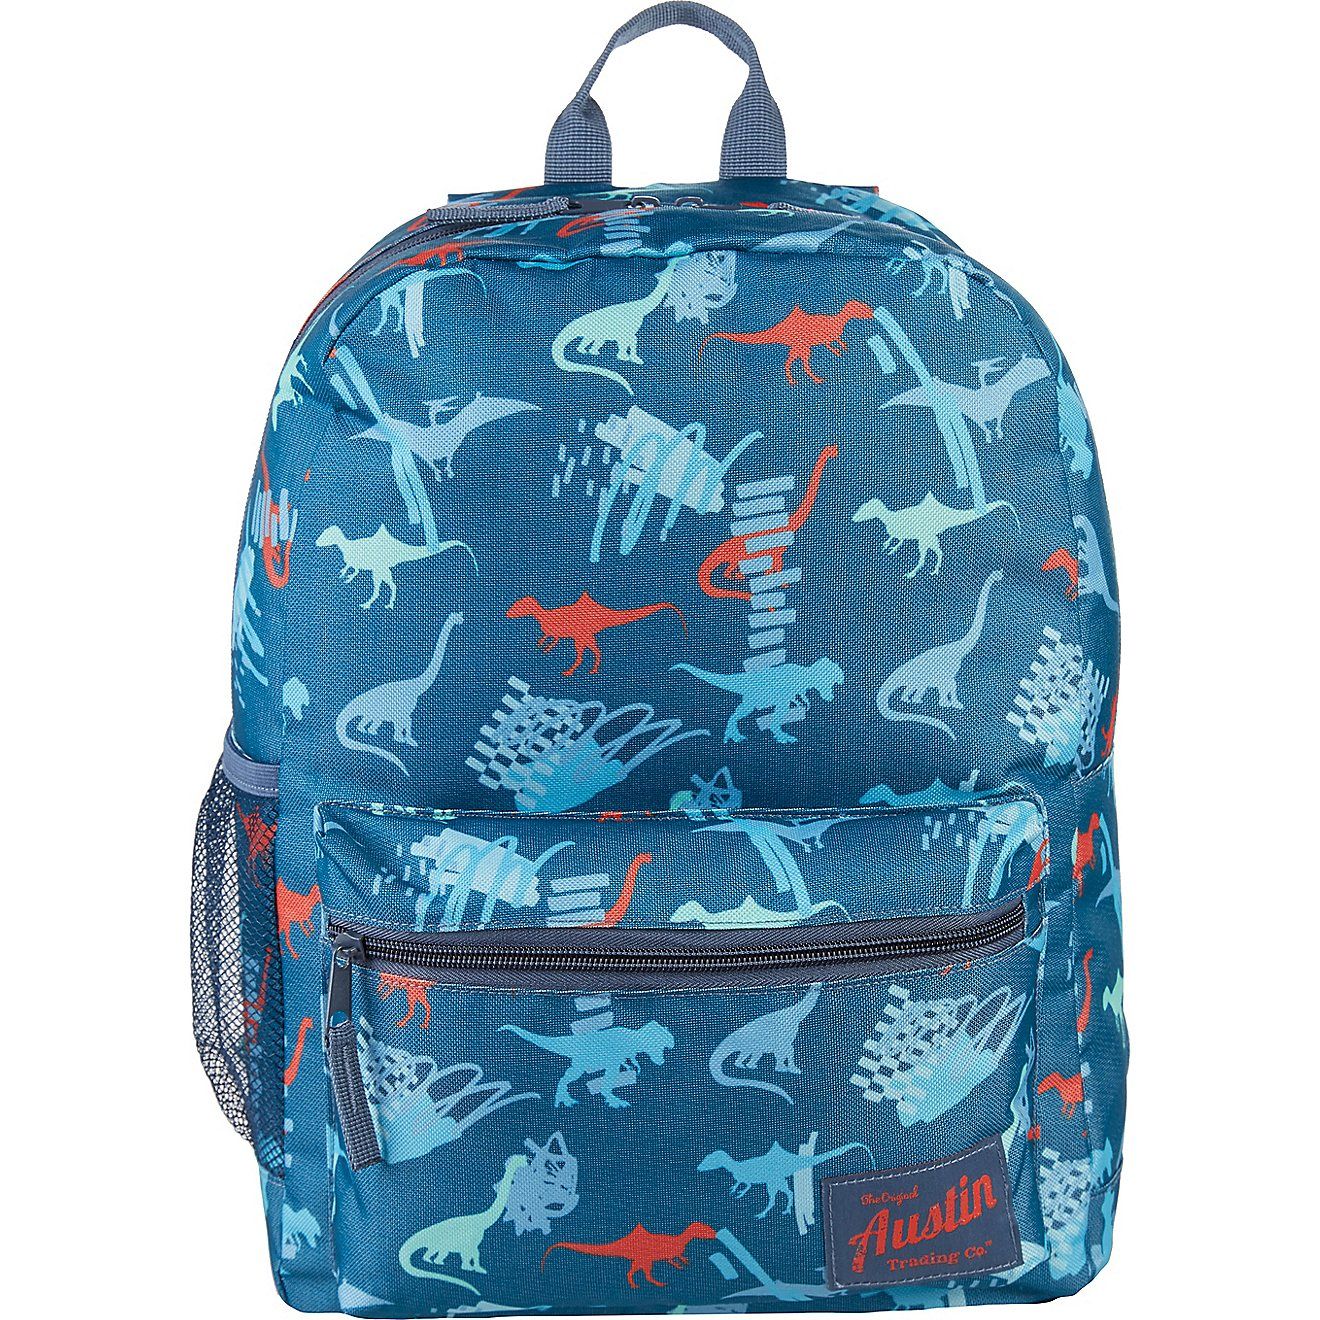 Austin Outdoors Kids Critter Backpack | Academy Sports + Outdoor Affiliate